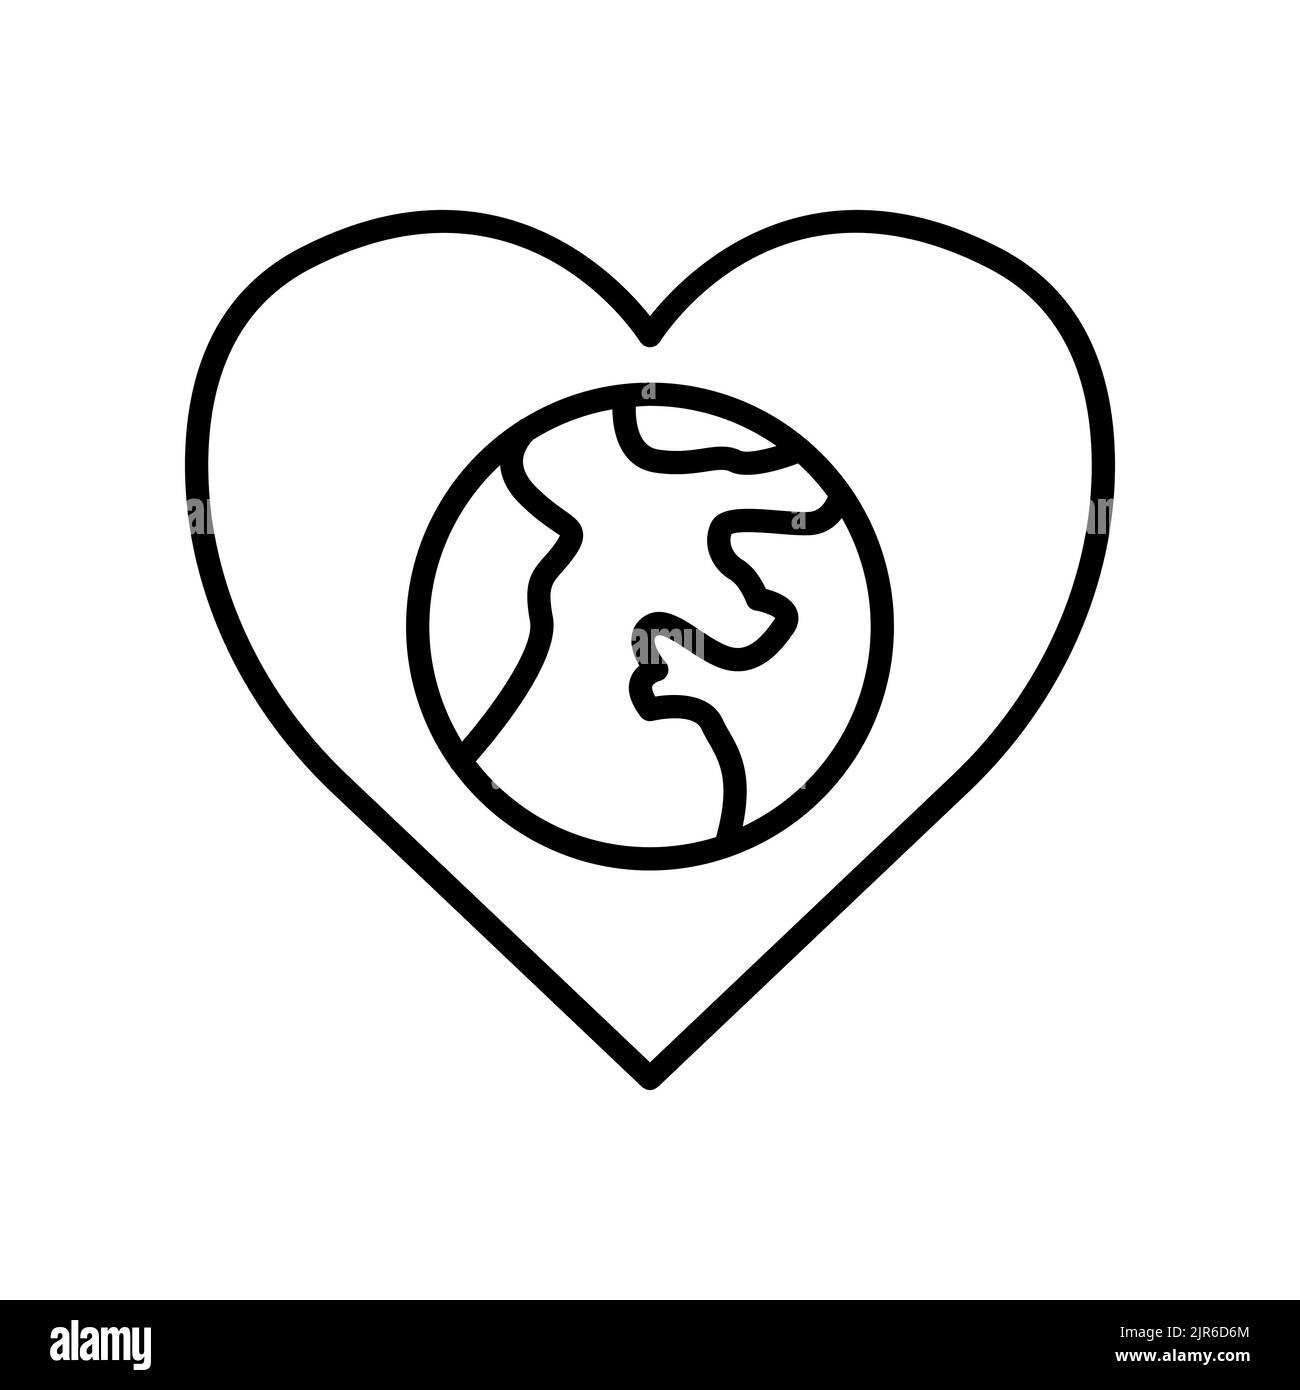 Earth icon in heart. icon related to charity, International day of charity. Line icon style. Simple design editable Stock Vector